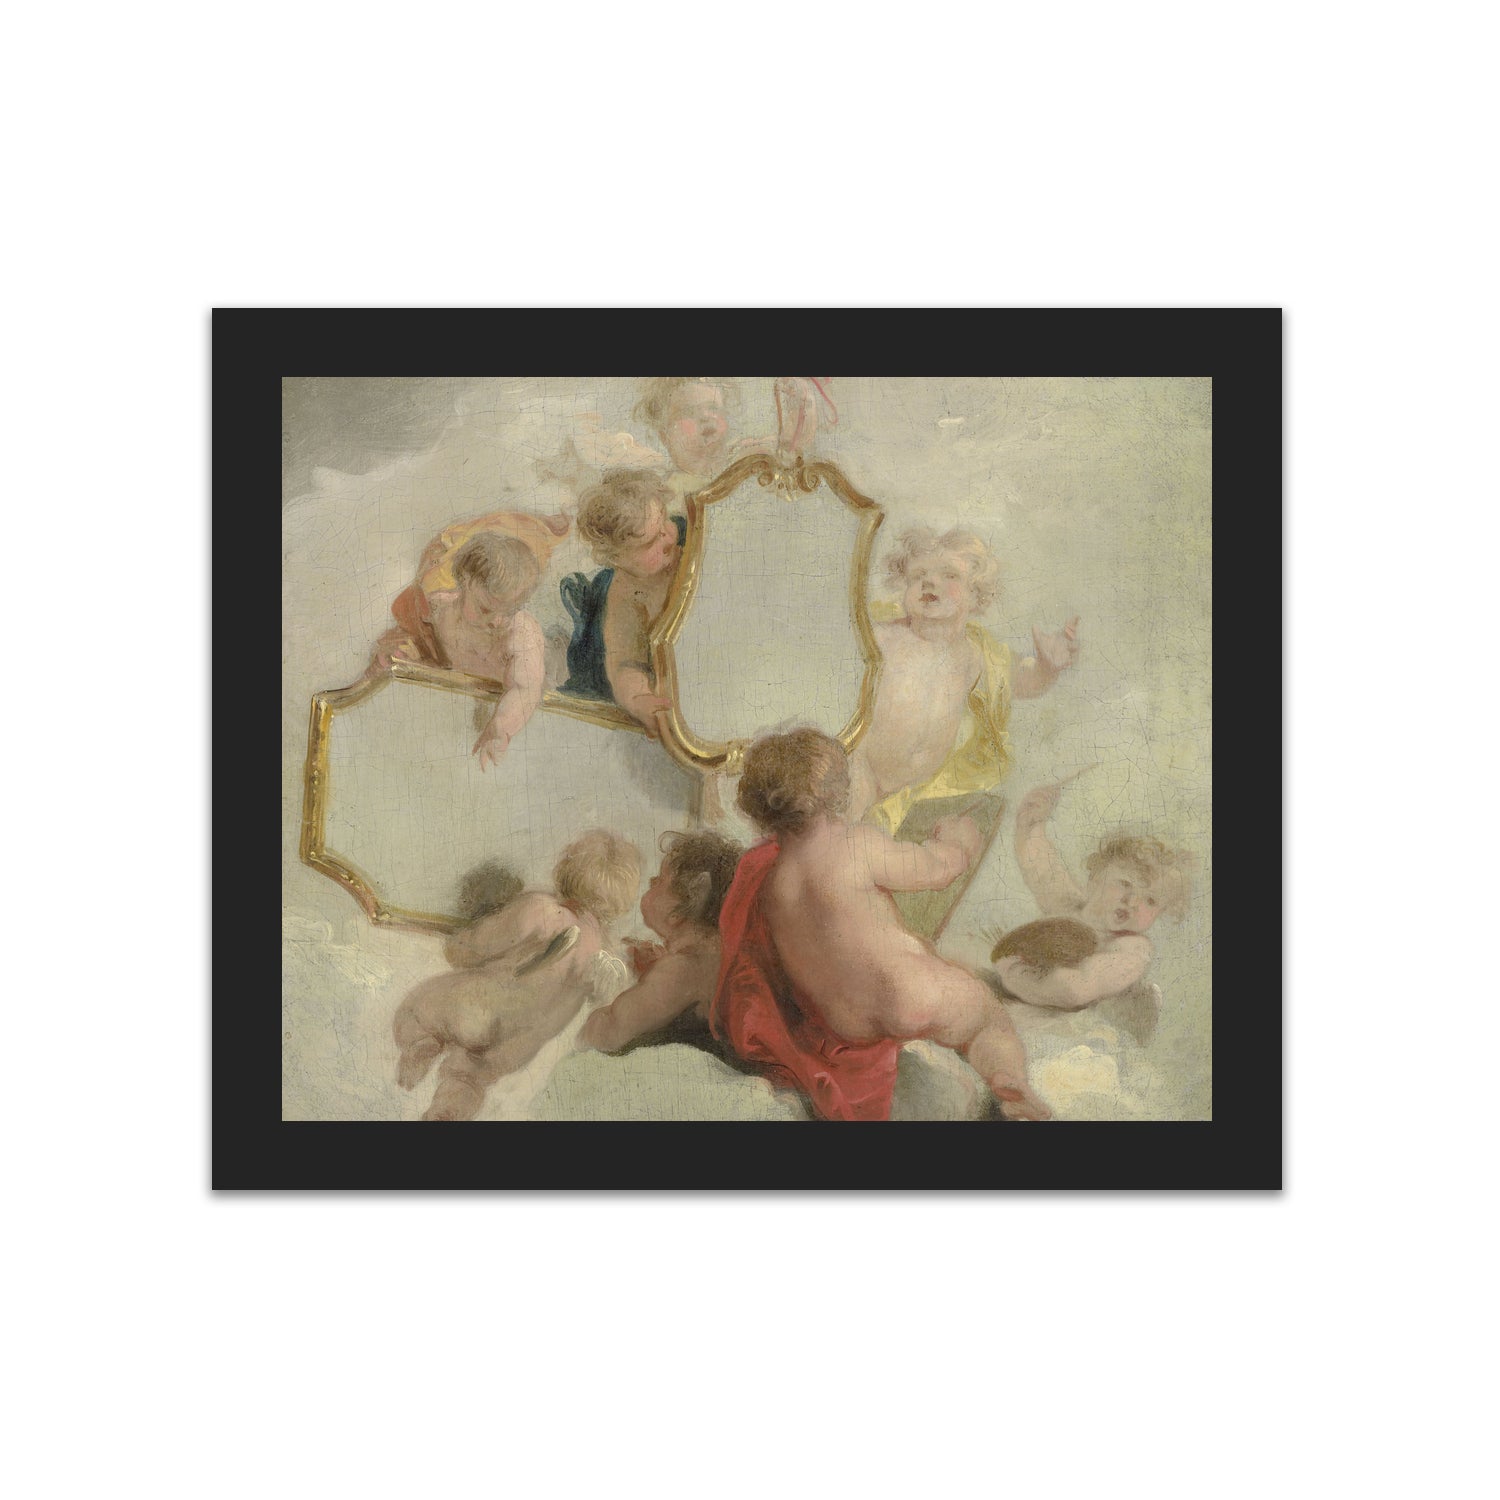 Putti with Mirrors